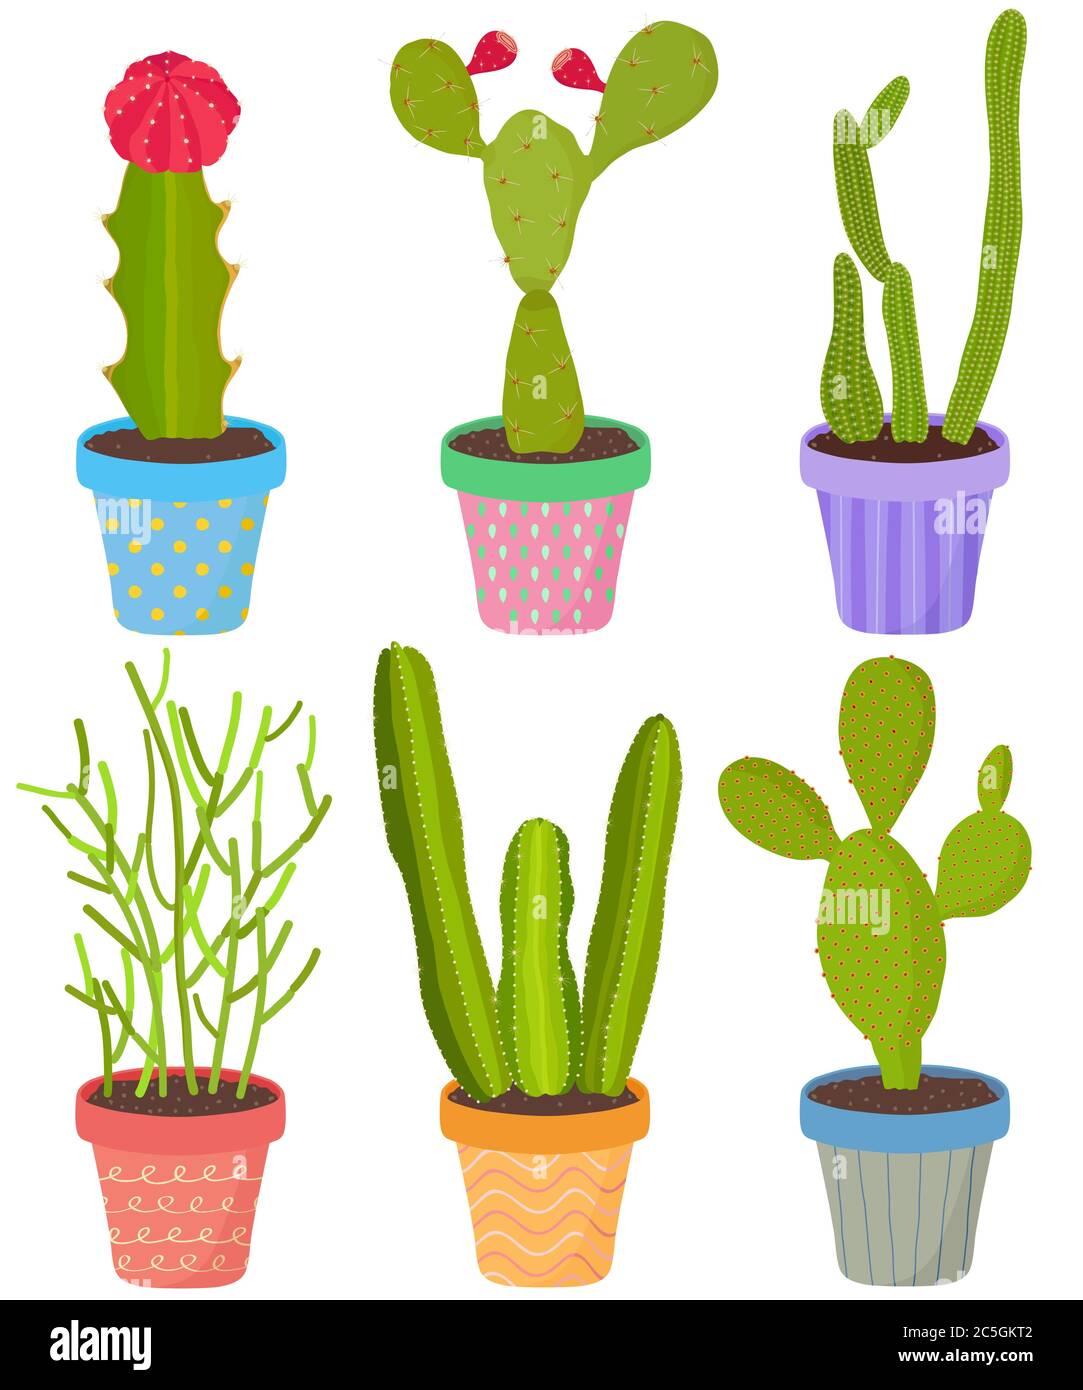 Vector set of cactus cacti aloe succulent plants in pot. Collection of flat styled hand drawn exotic houseplant. Cute illustration isolated on white. Stock Vector